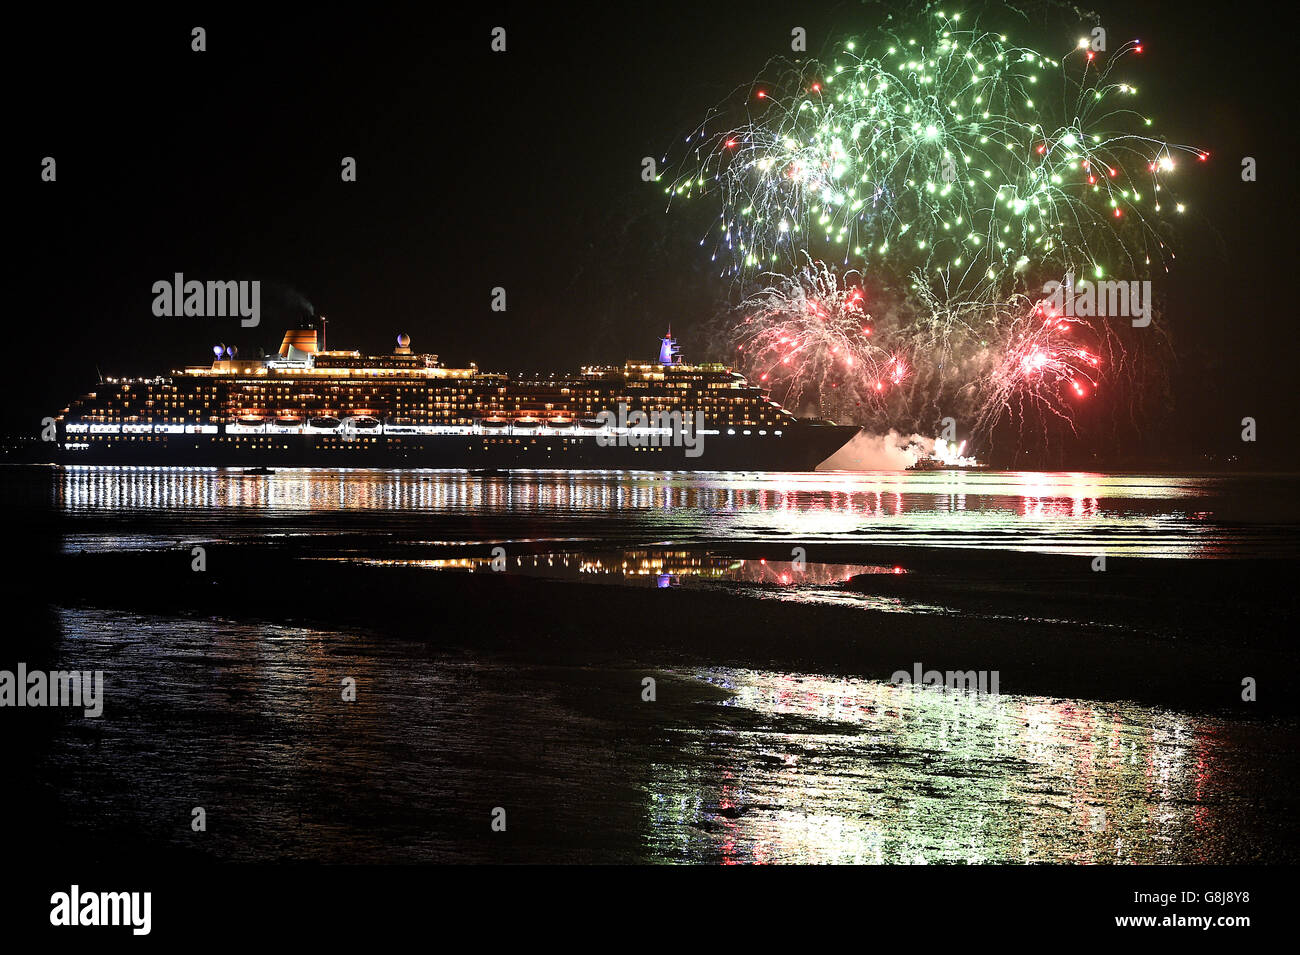 Fireworks are let off as Cunard's Queen Victoria, one of the Three Queens liners, makes her way down Southampton water into the River Solent on her first world voyage of 2016. Stock Photo